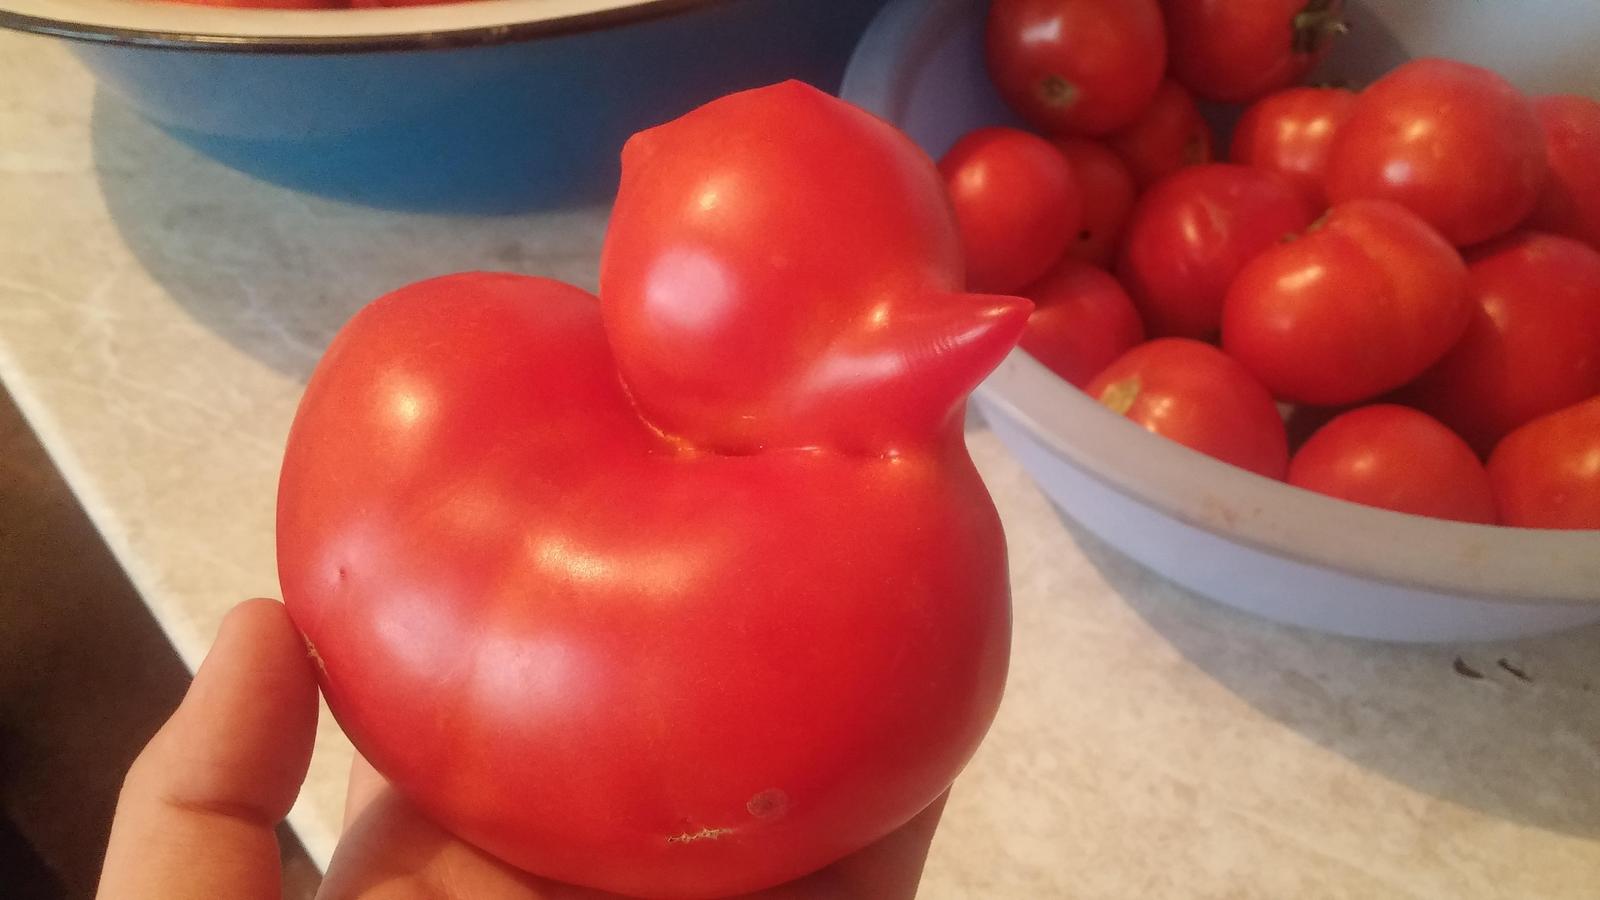 This tomato looks like a duck - Tomatoes, Duck, Reddit